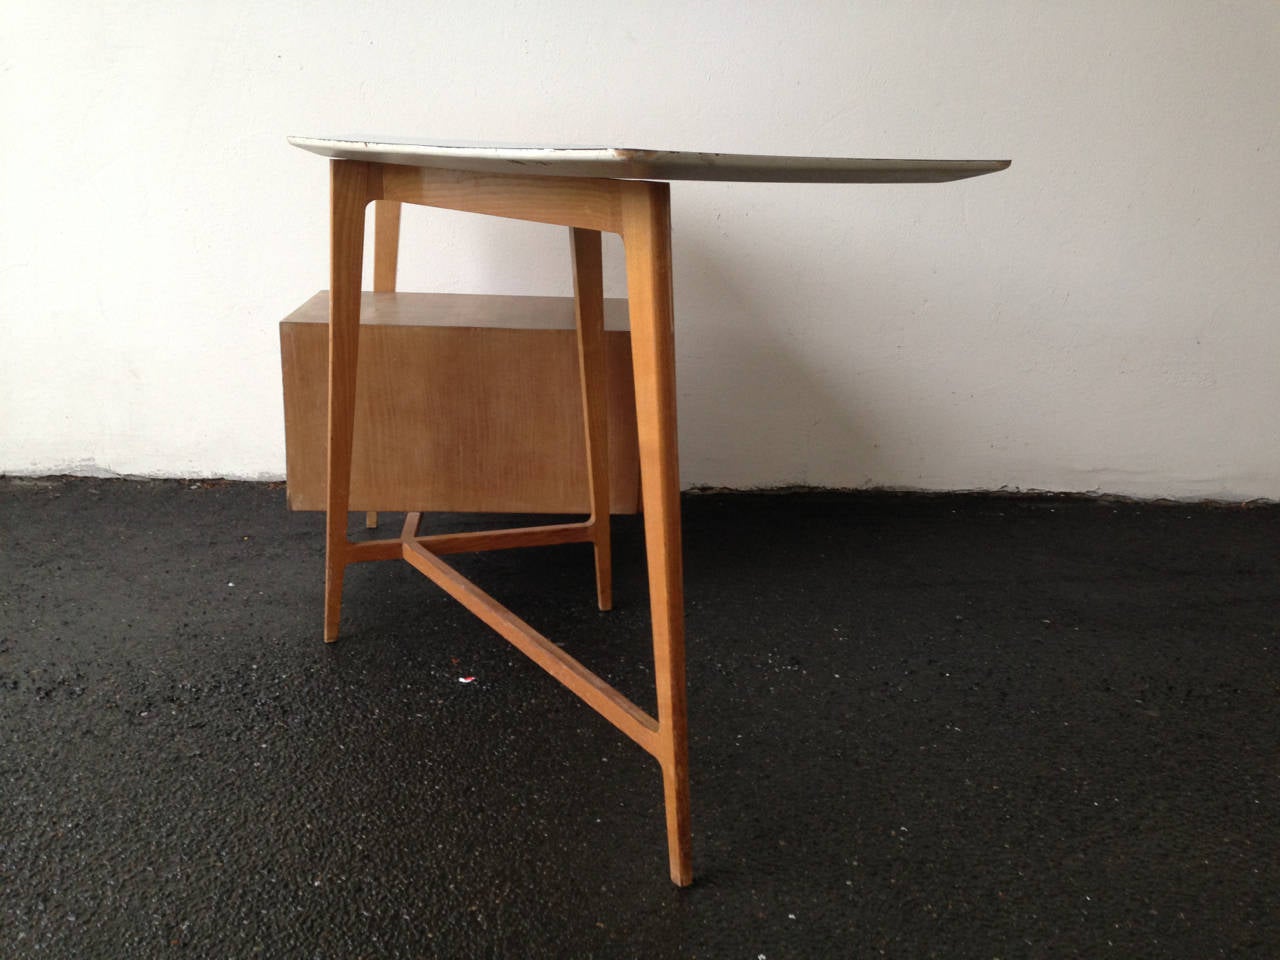 Italian Small Curved Desk with Matching Chair Attributed to Gio Ponti